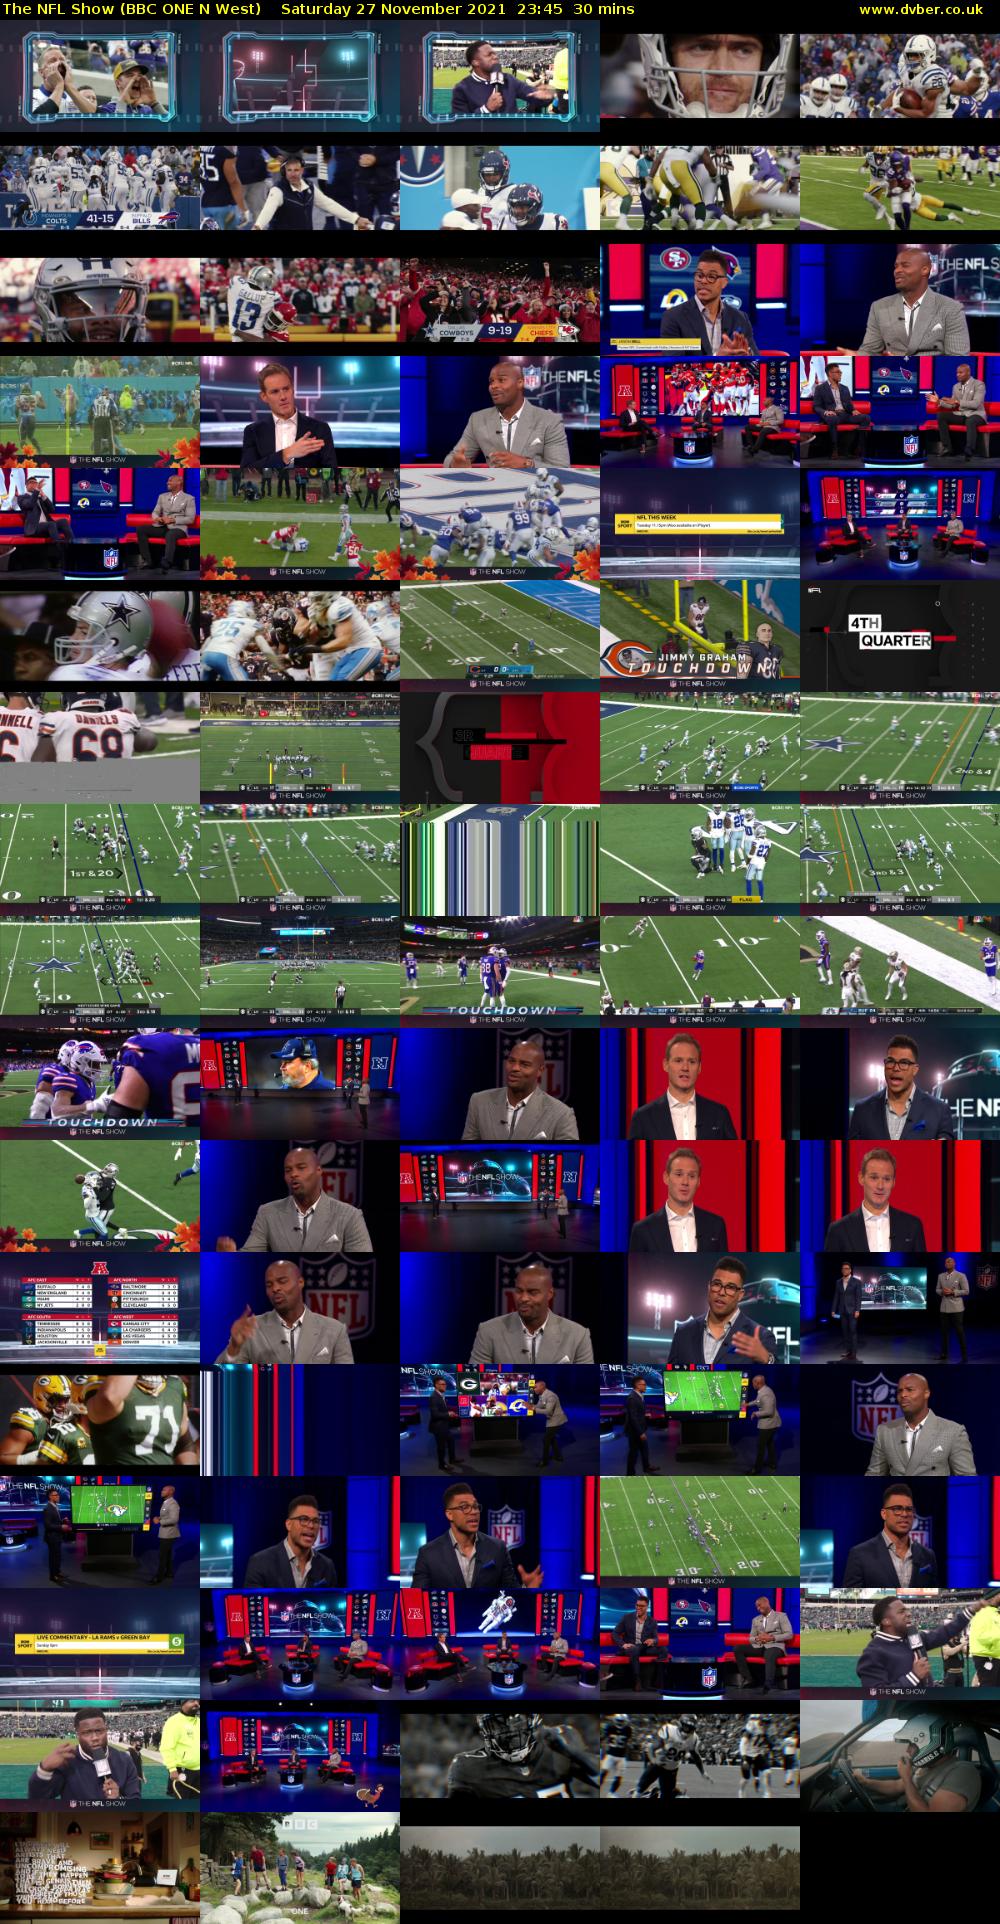 The NFL Show (BBC ONE N West) Saturday 27 November 2021 23:45 - 00:15